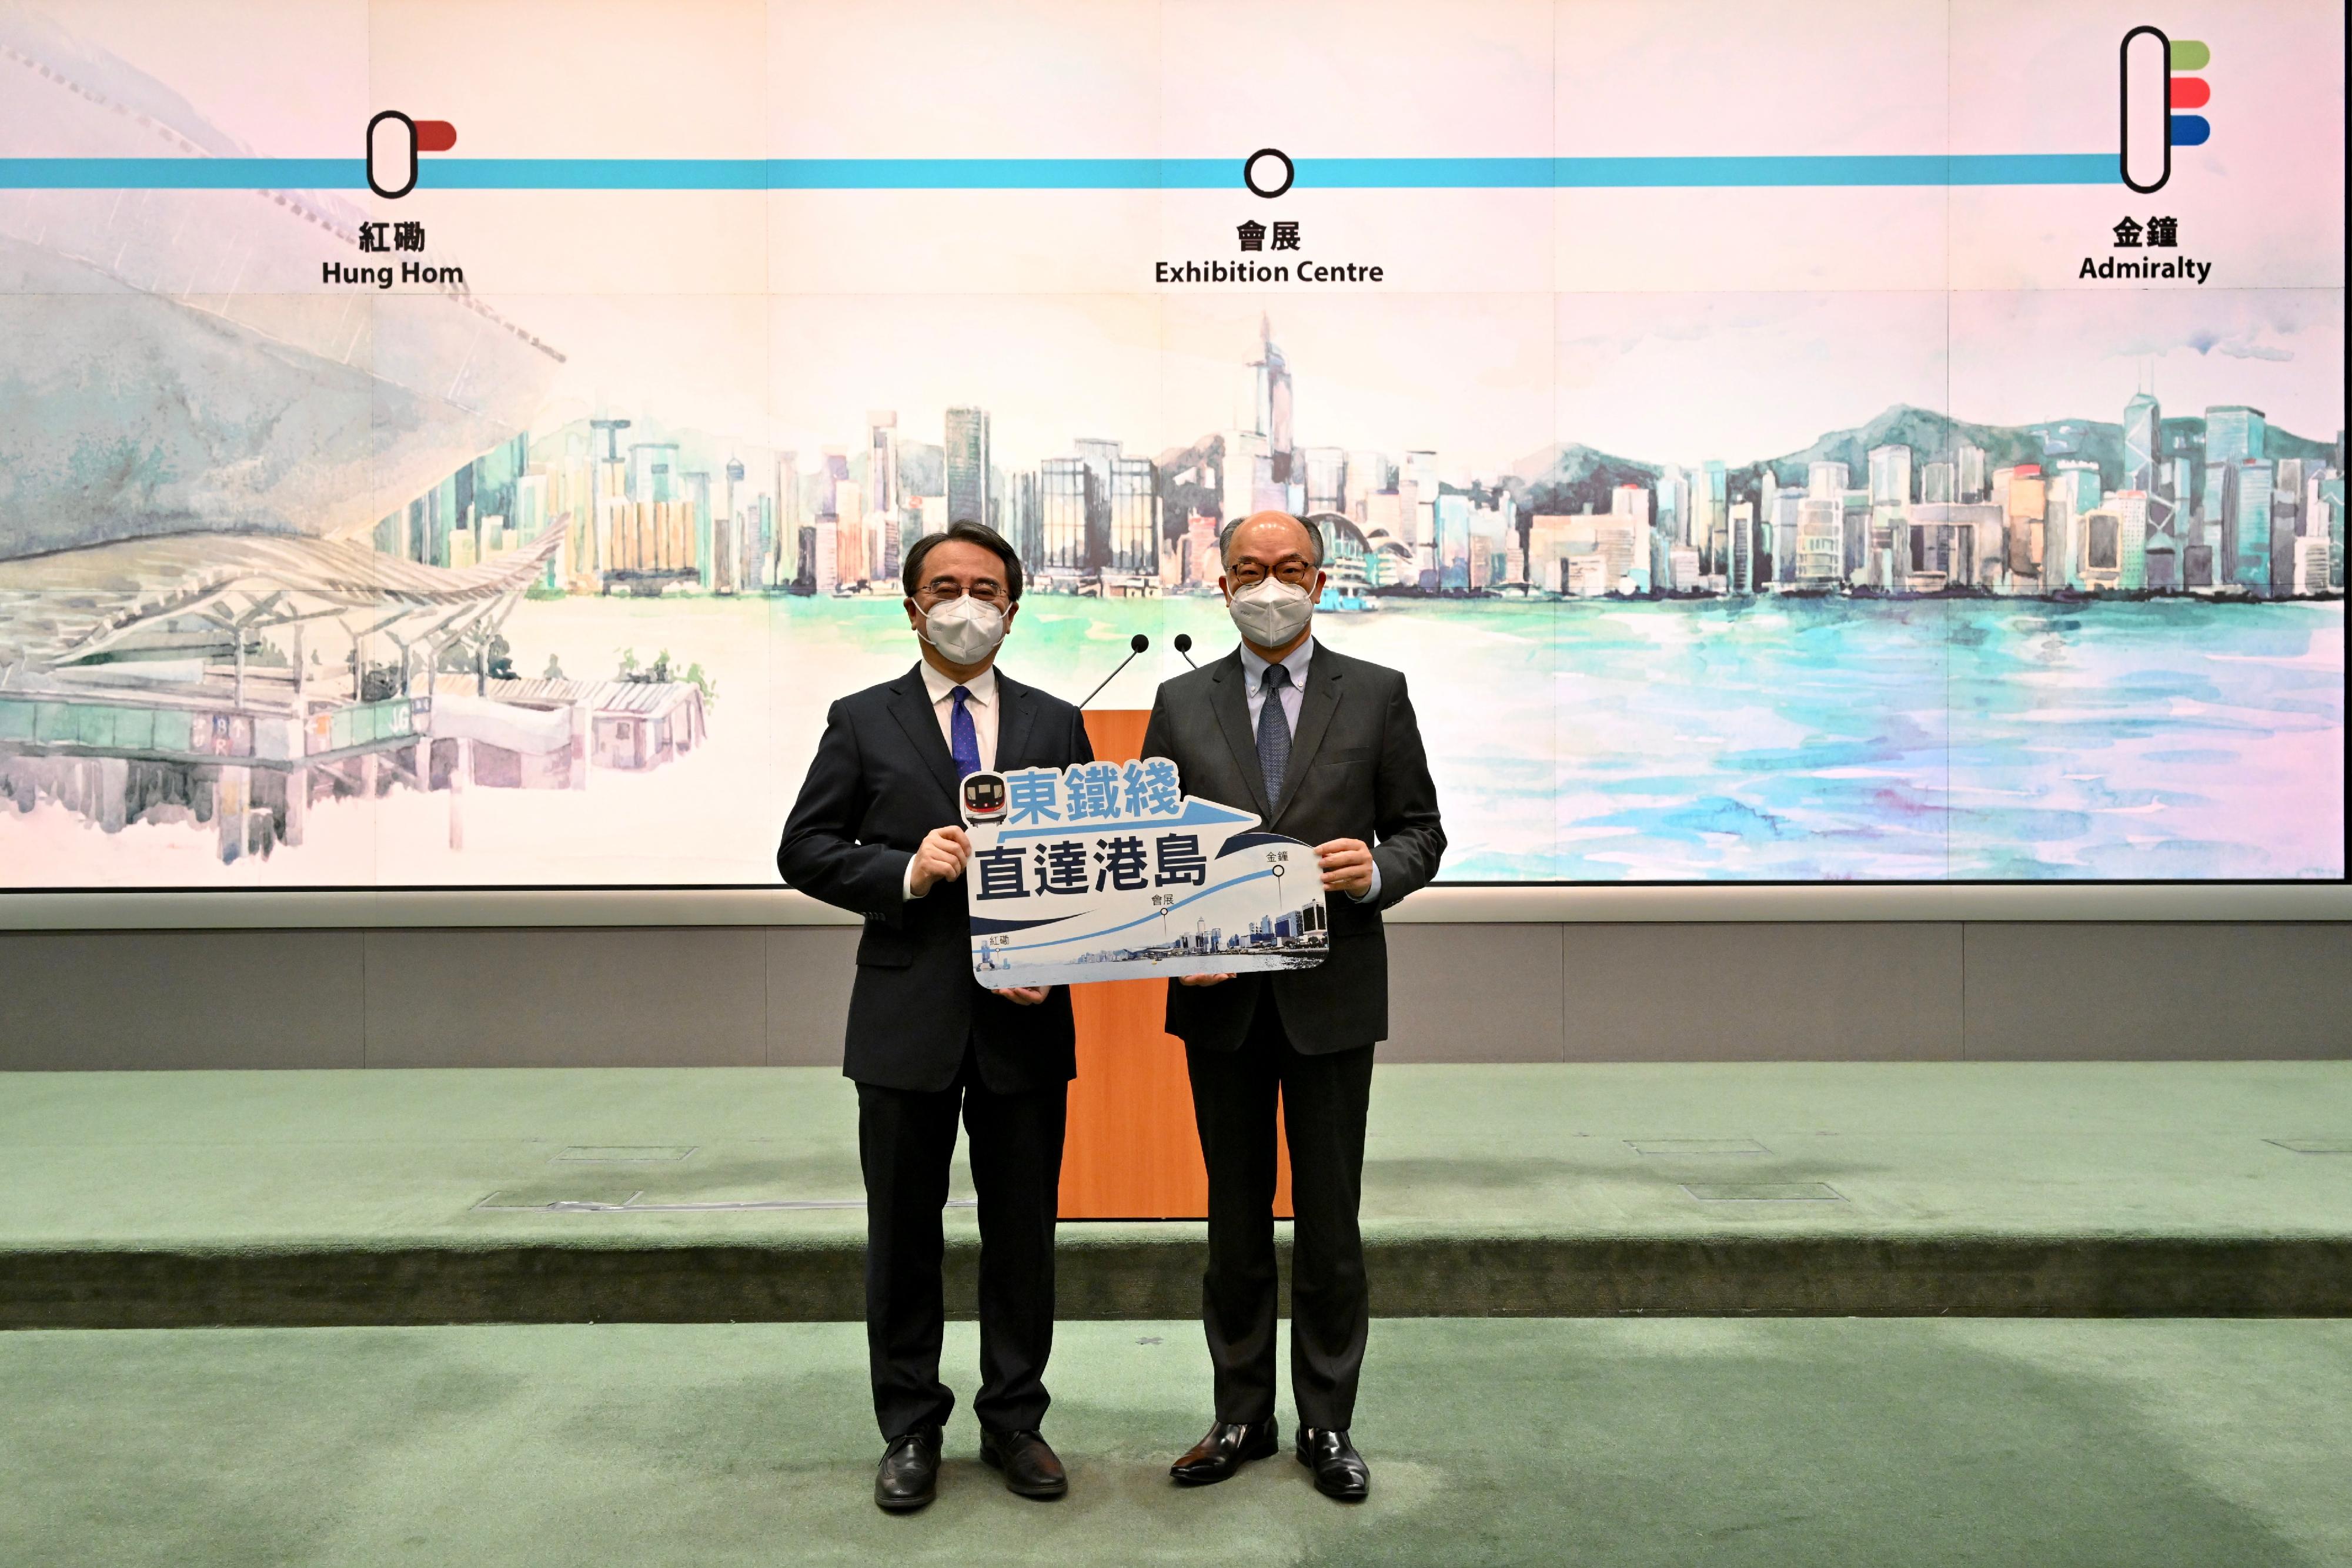 The Secretary for Transport and Housing, Mr Frank Chan Fan (right), announces the commissioning date of the East Rail Line cross-harbour extension with the Chief Executive Officer of the MTR Corporation Limited, Dr Jacob Kam (left), today (May 3).